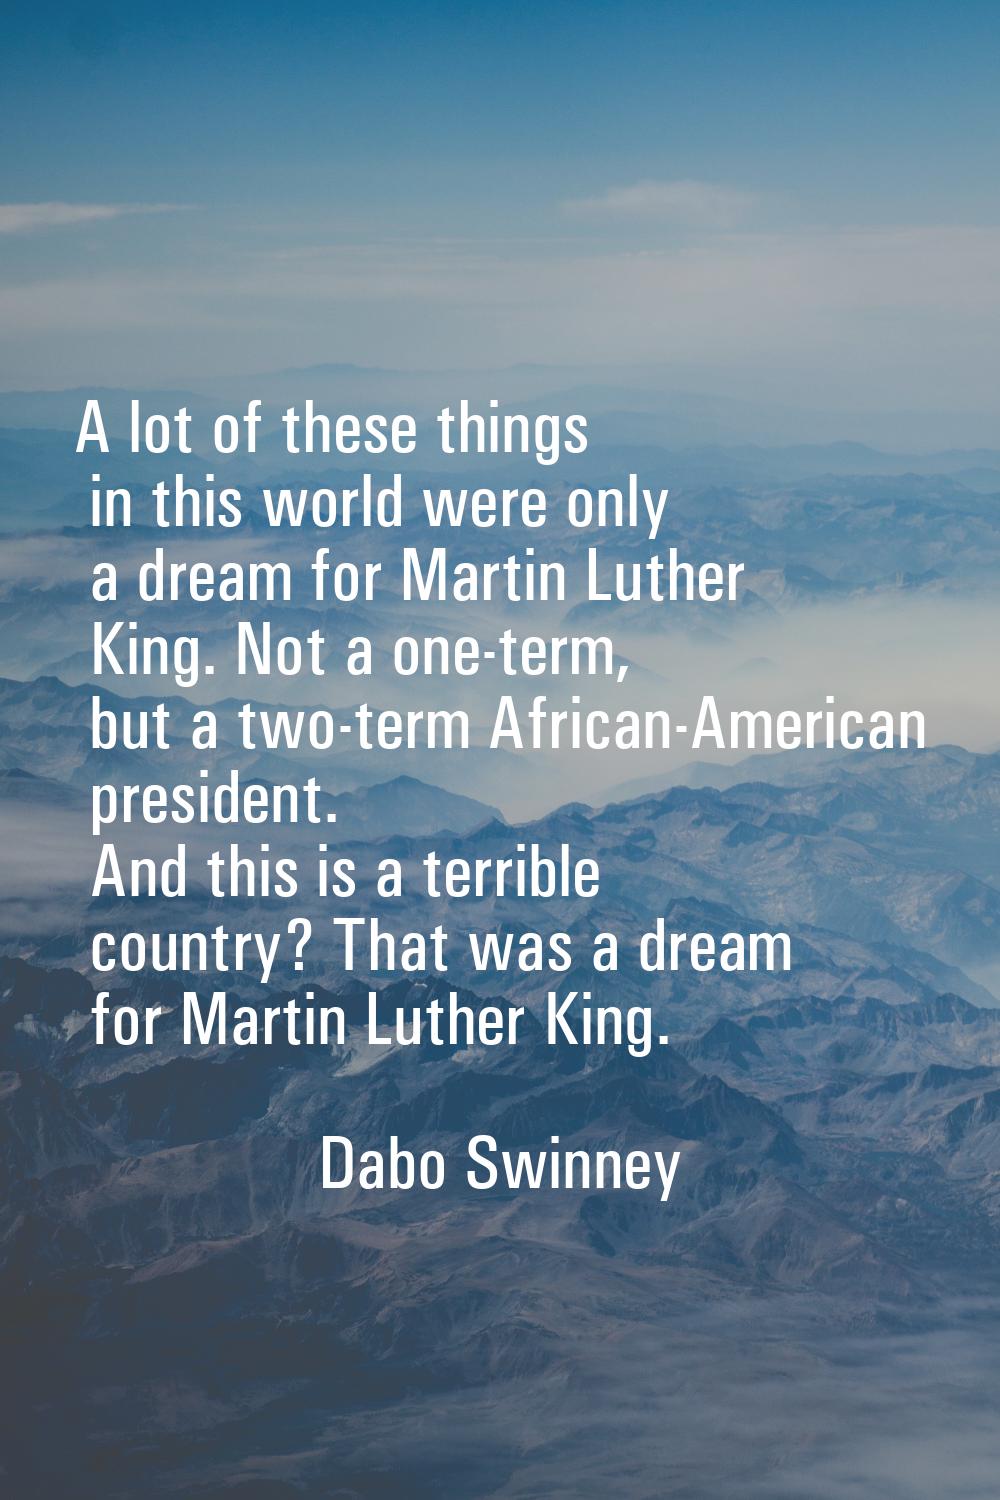 A lot of these things in this world were only a dream for Martin Luther King. Not a one-term, but a